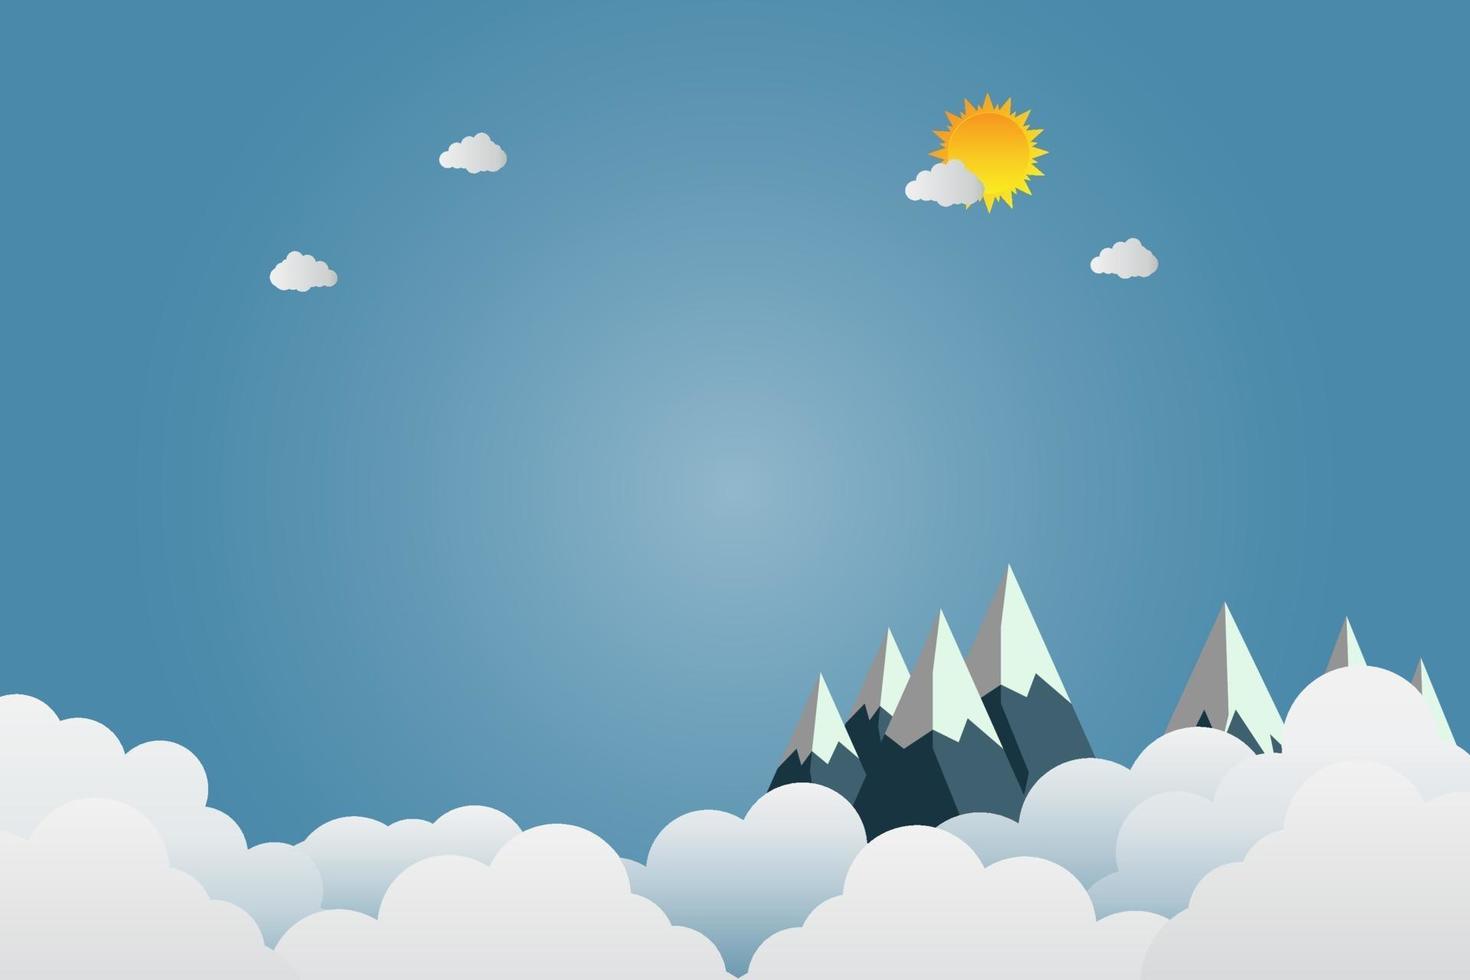 mountains with beautiful sunsets over the clouds.paper art.vector illustration vector